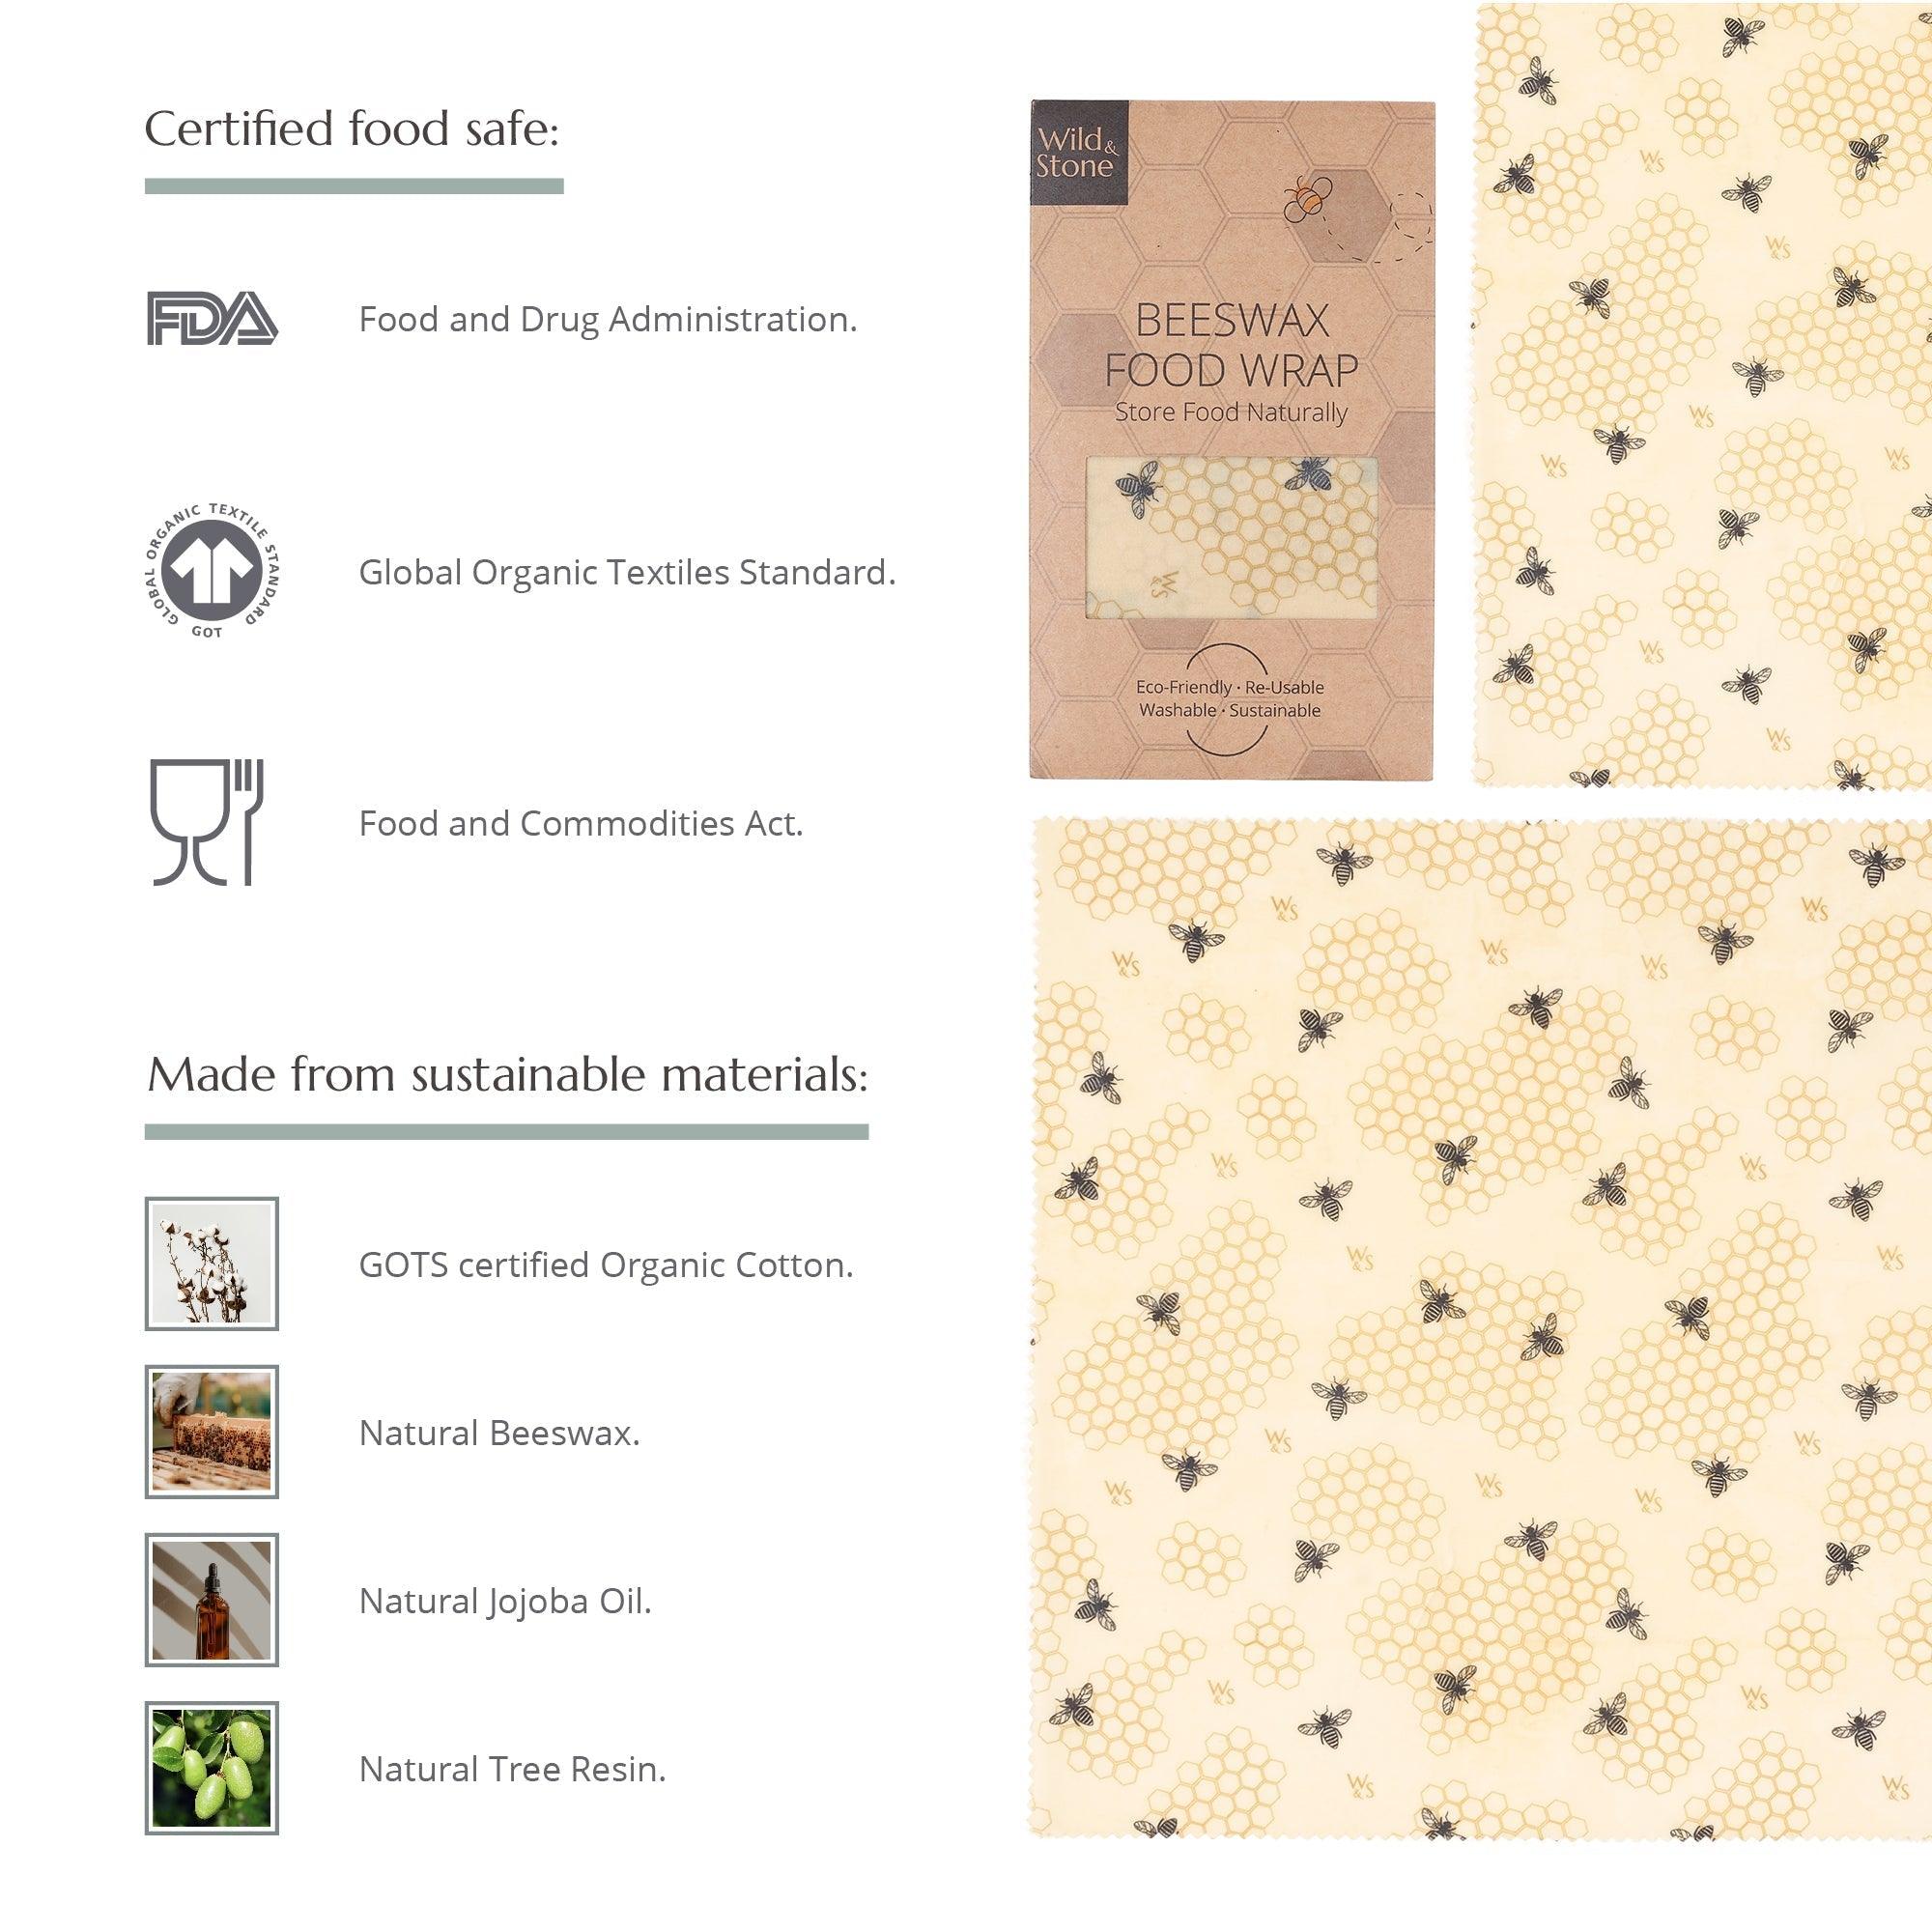 Beeswax Food Wraps - 3 Pack - THE SUS&TAIN STORE